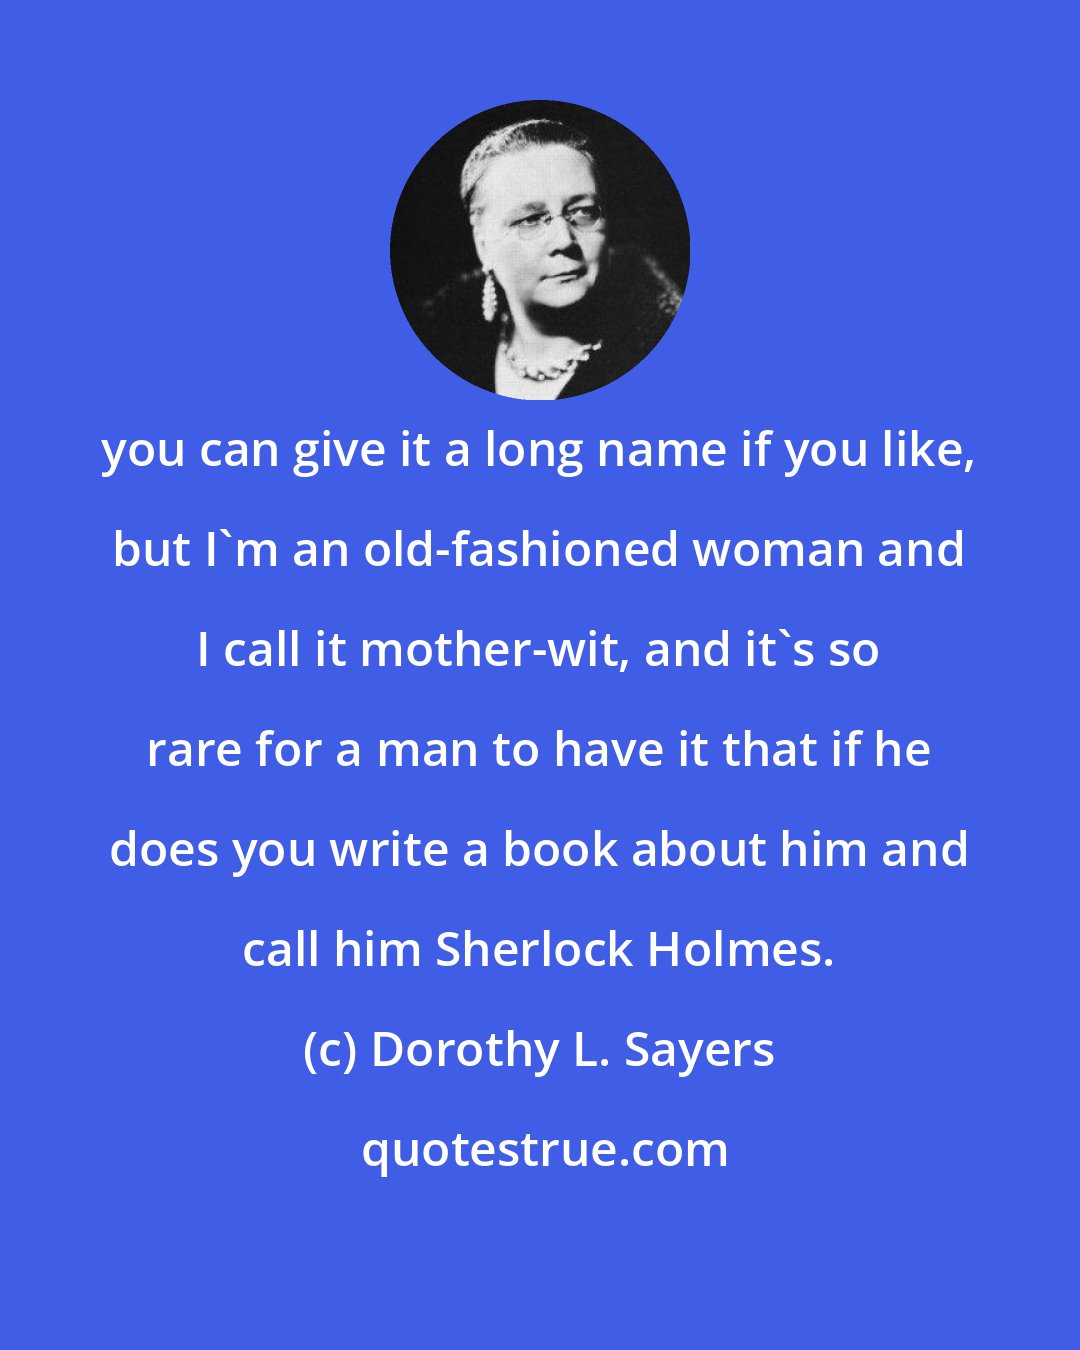 Dorothy L. Sayers: you can give it a long name if you like, but I'm an old-fashioned woman and I call it mother-wit, and it's so rare for a man to have it that if he does you write a book about him and call him Sherlock Holmes.